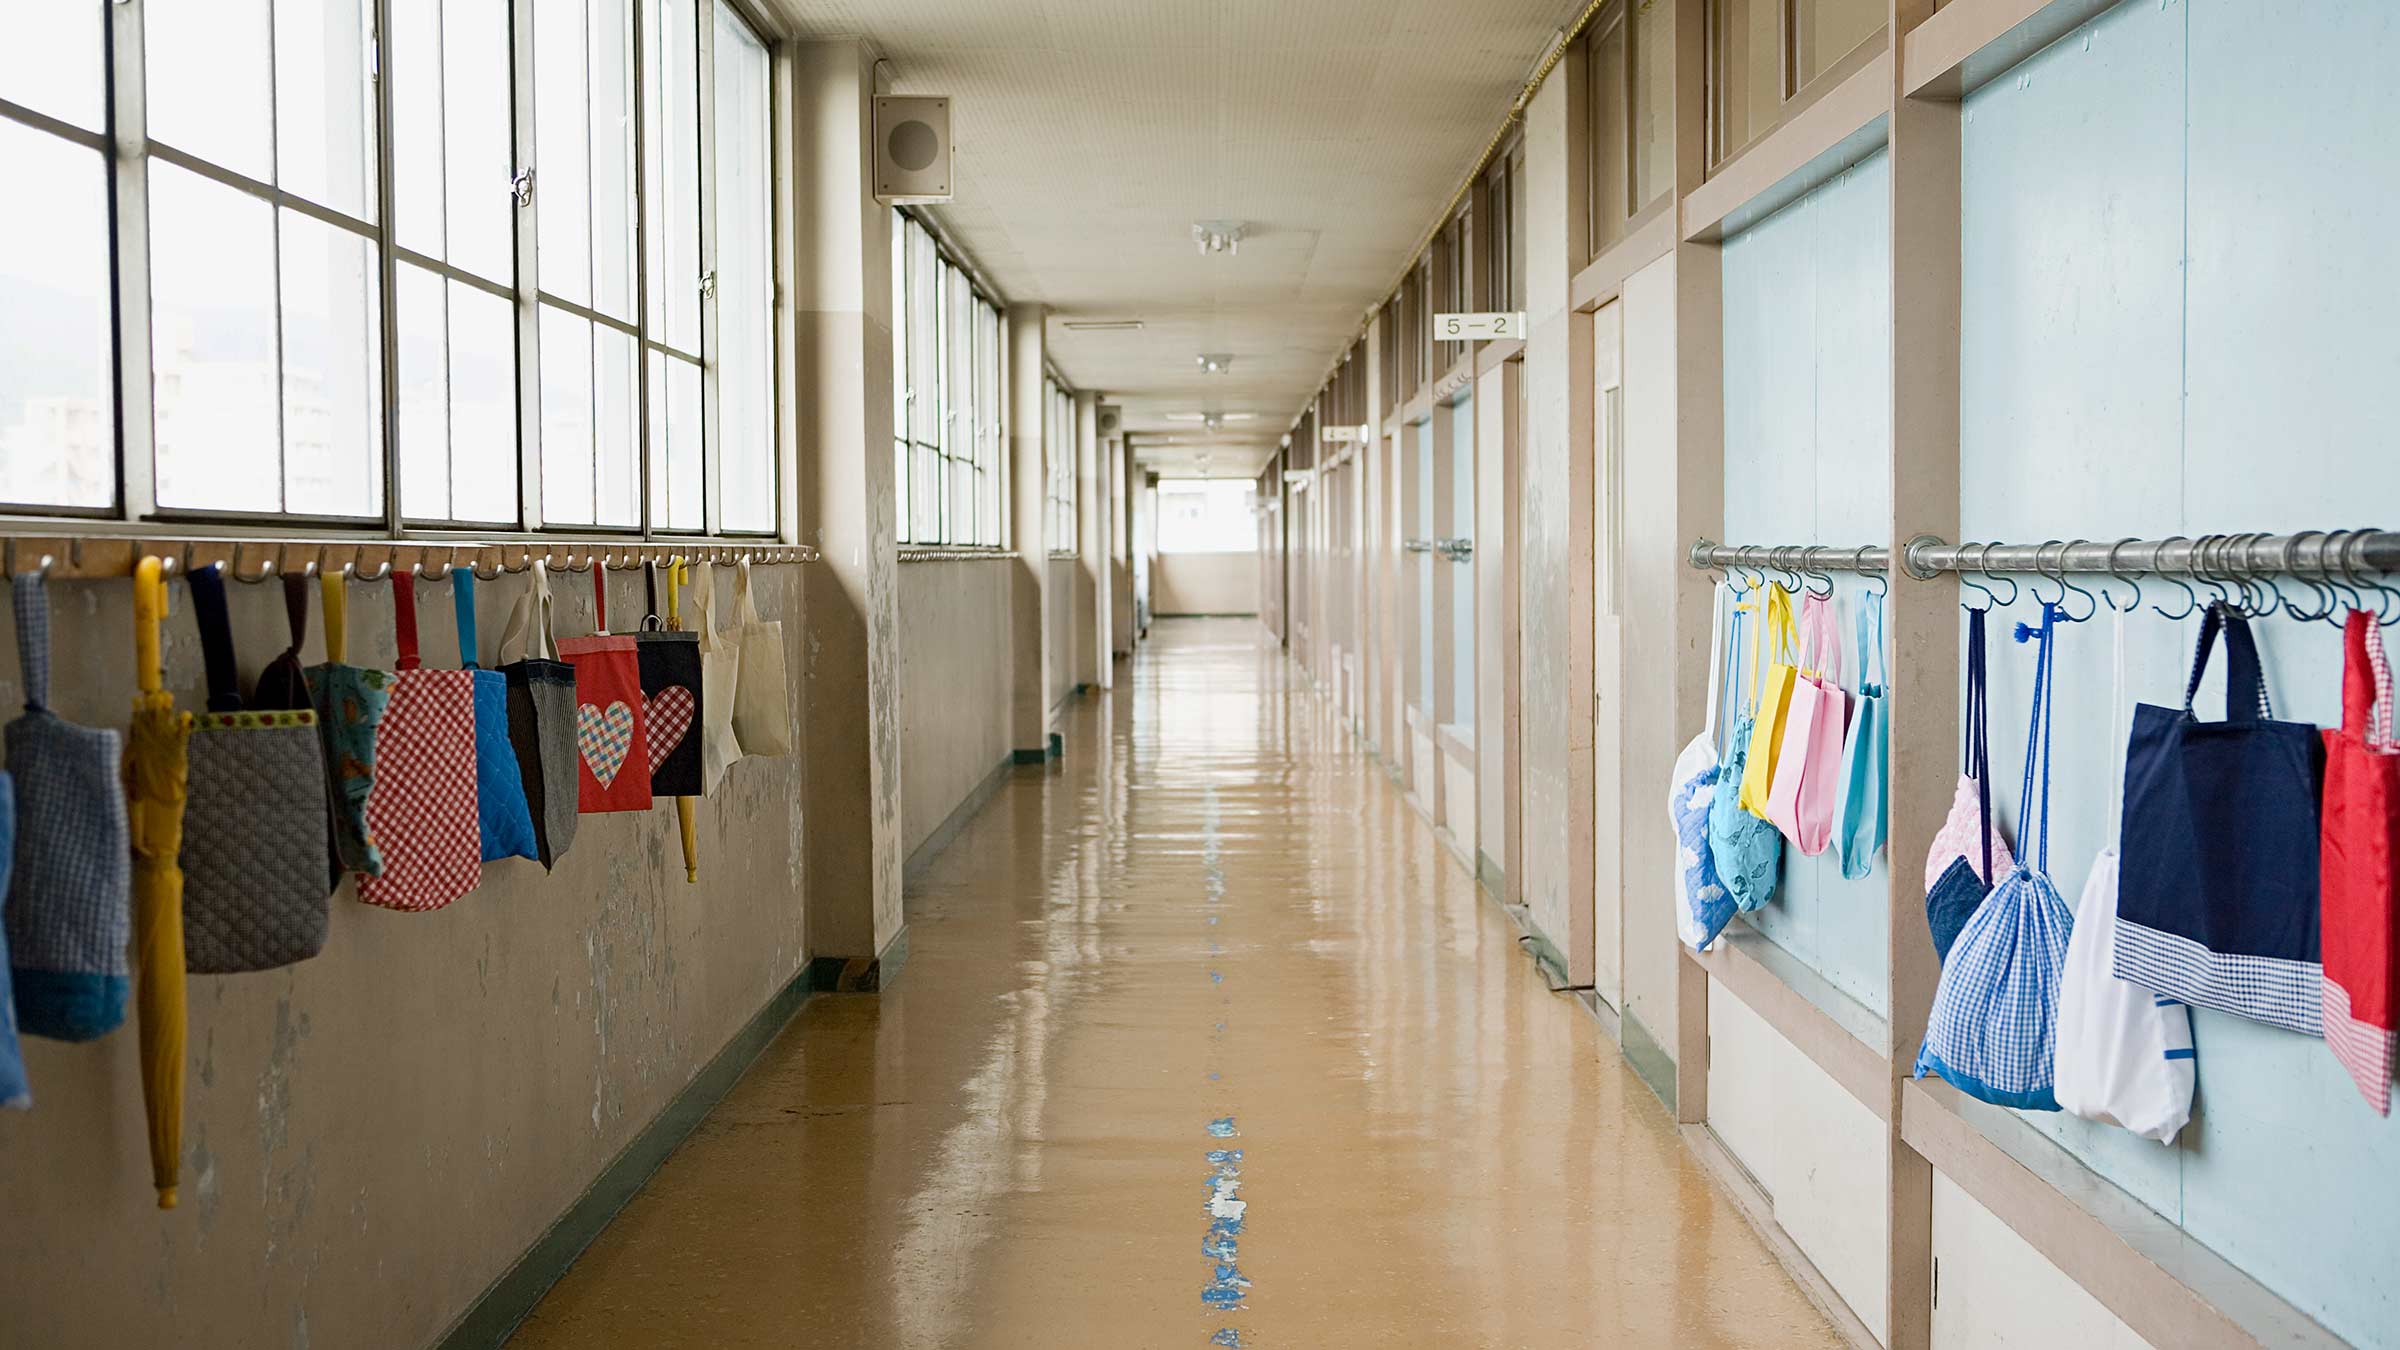 A school corridor with bags hanging along the walls